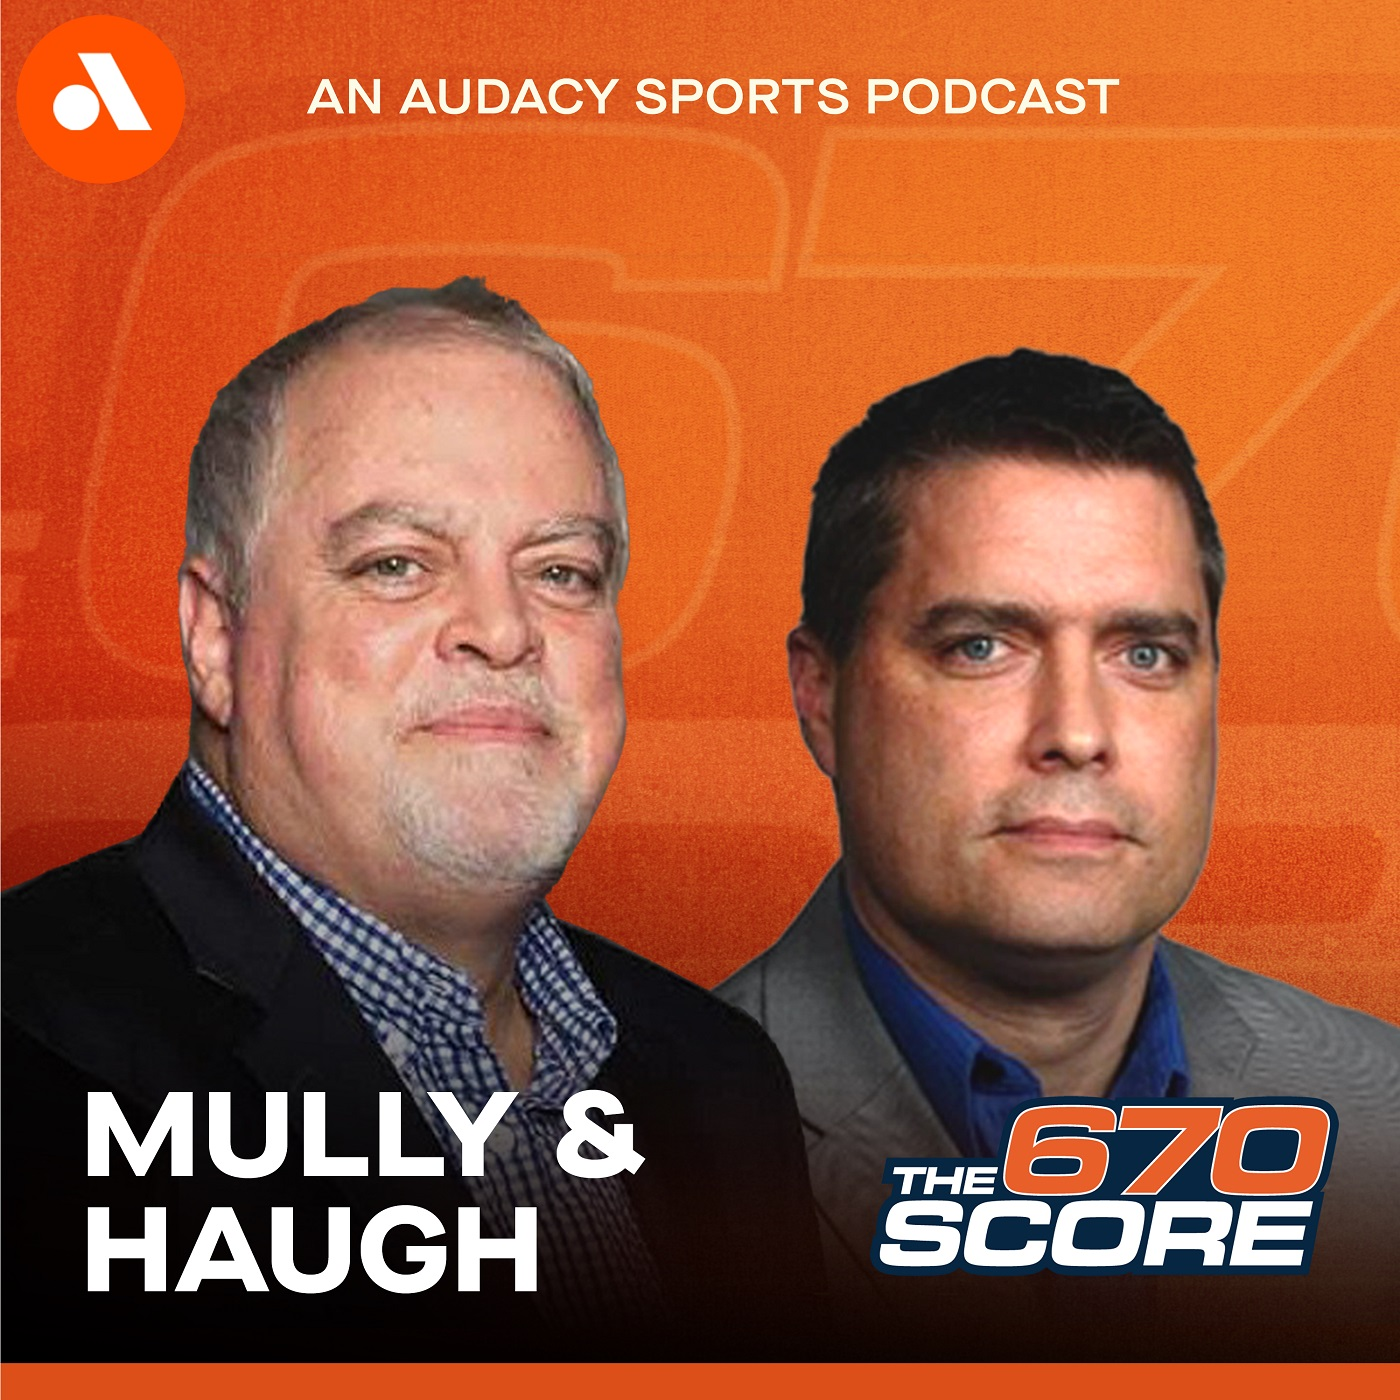 Mully & Haugh: Pat Forde & Mike Florio interviews (Hour 4)